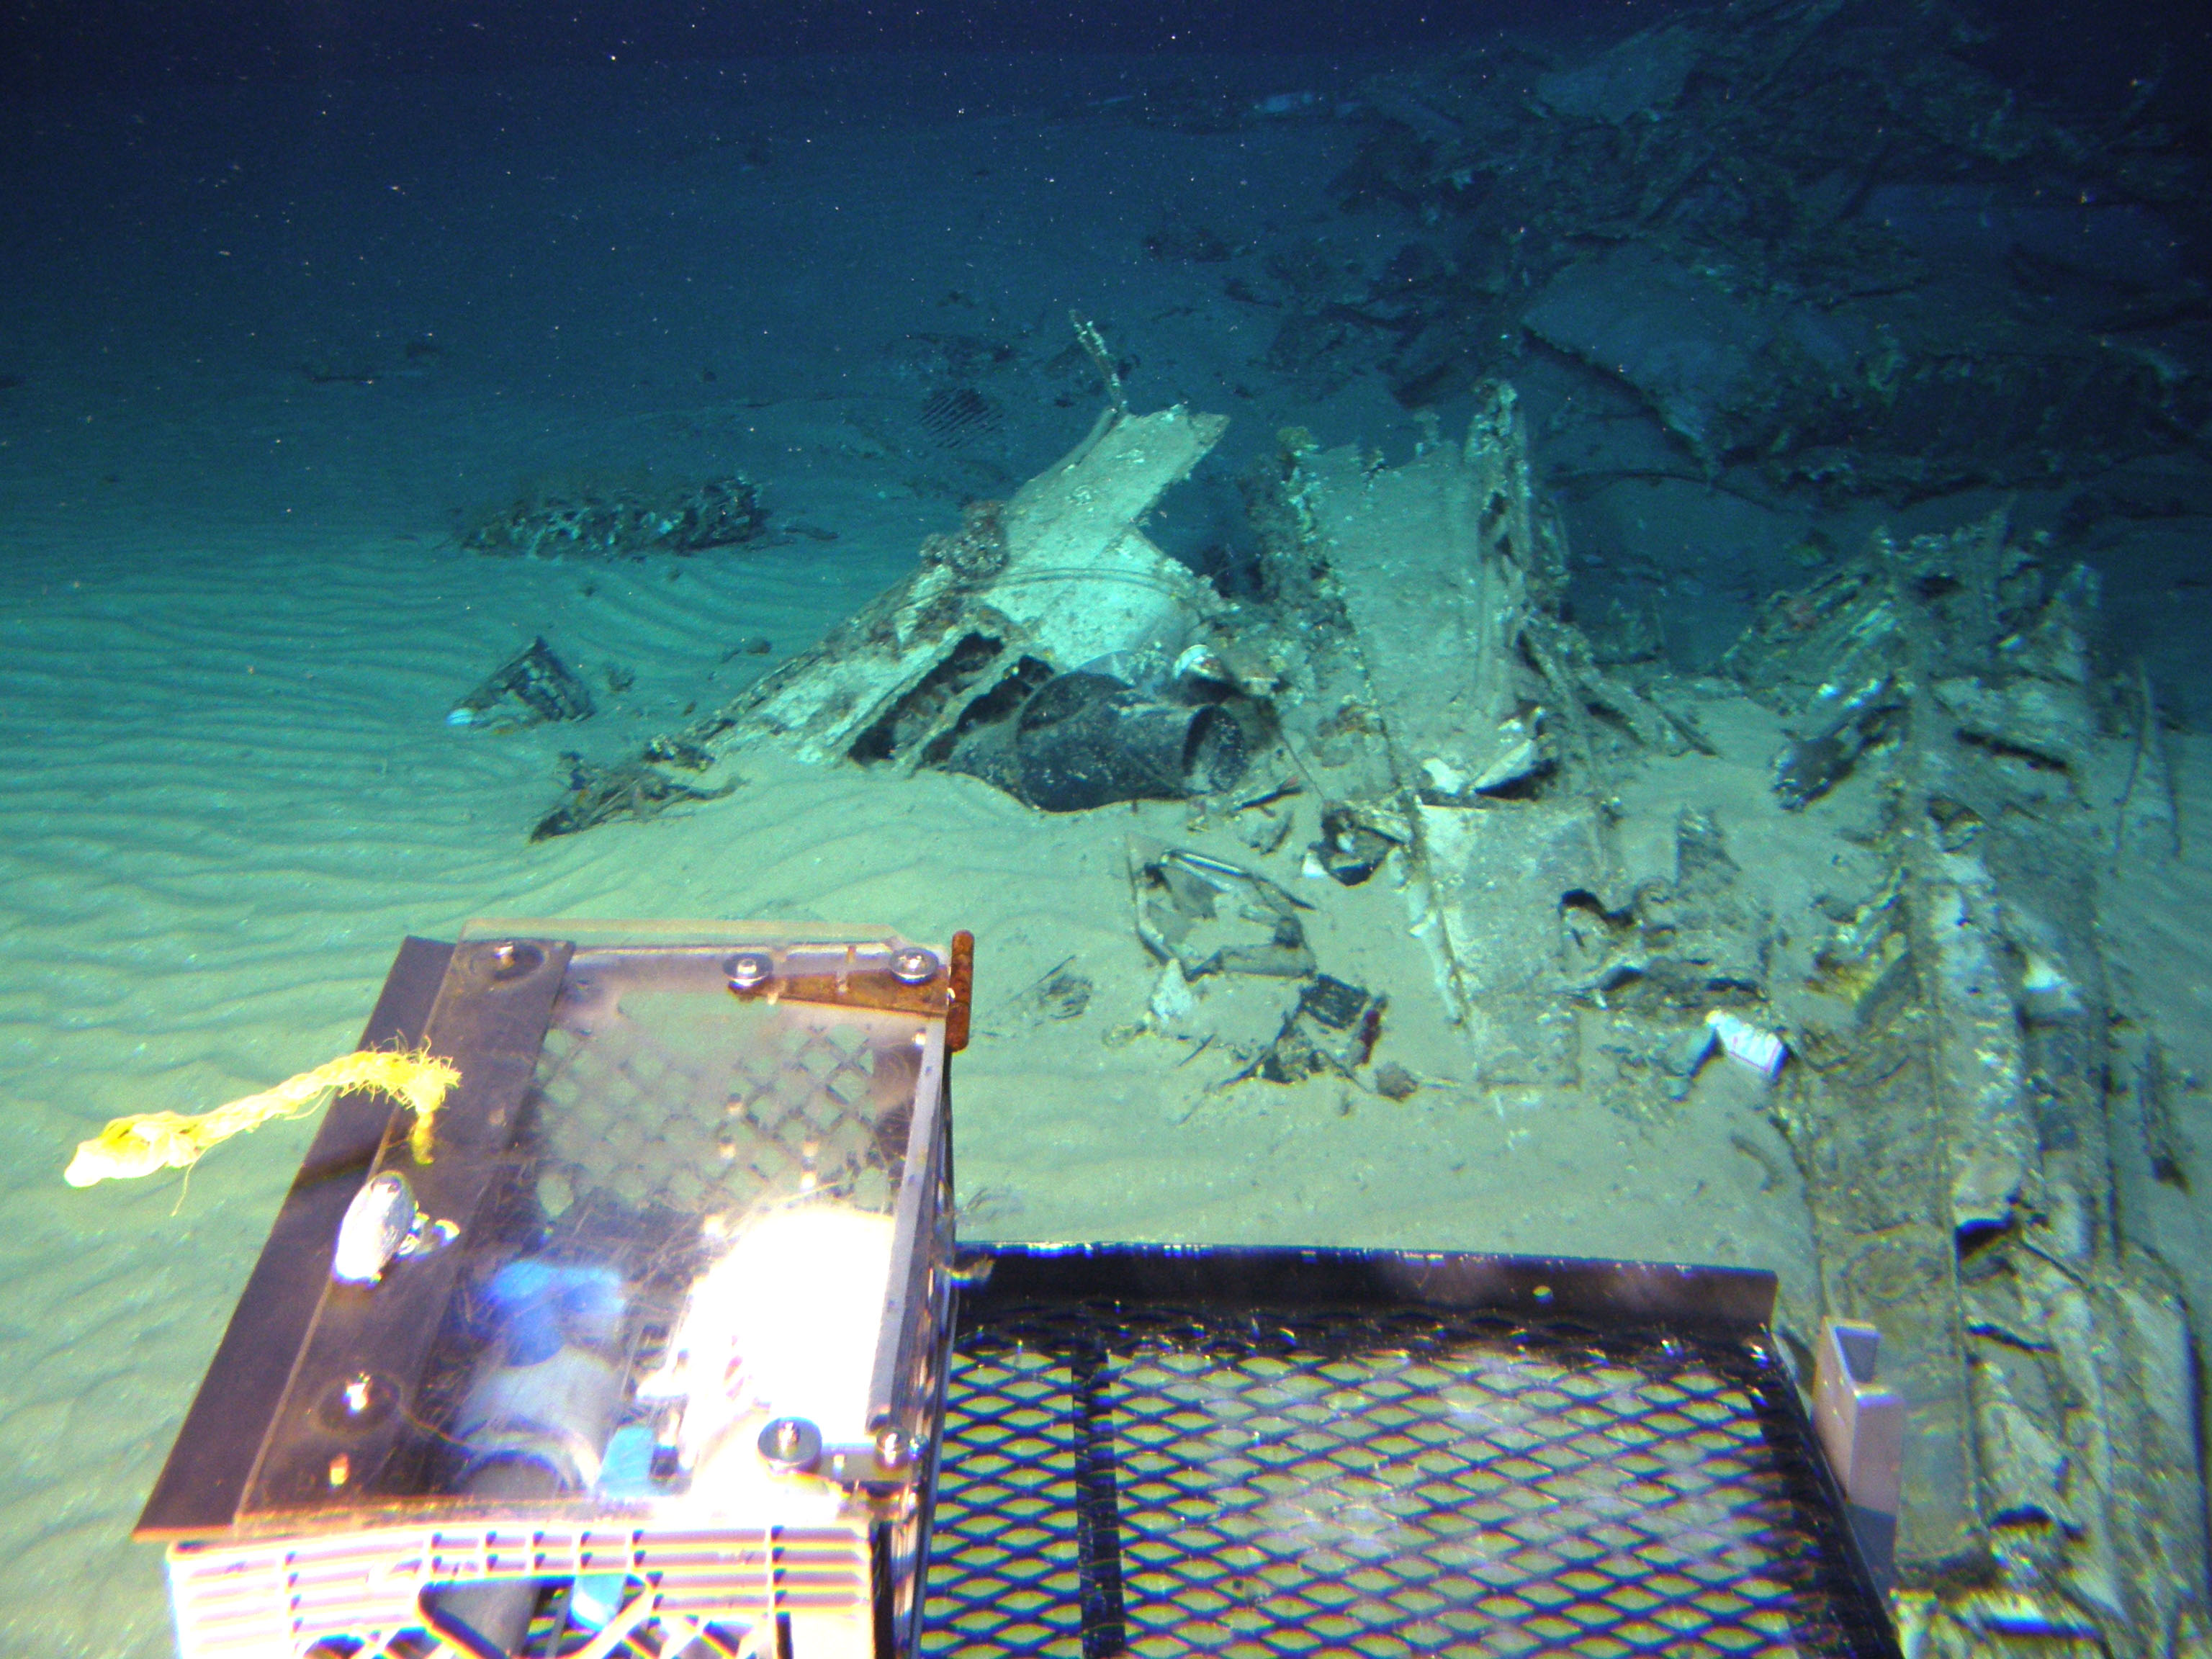 Survey: Engine, wing root and wreckage